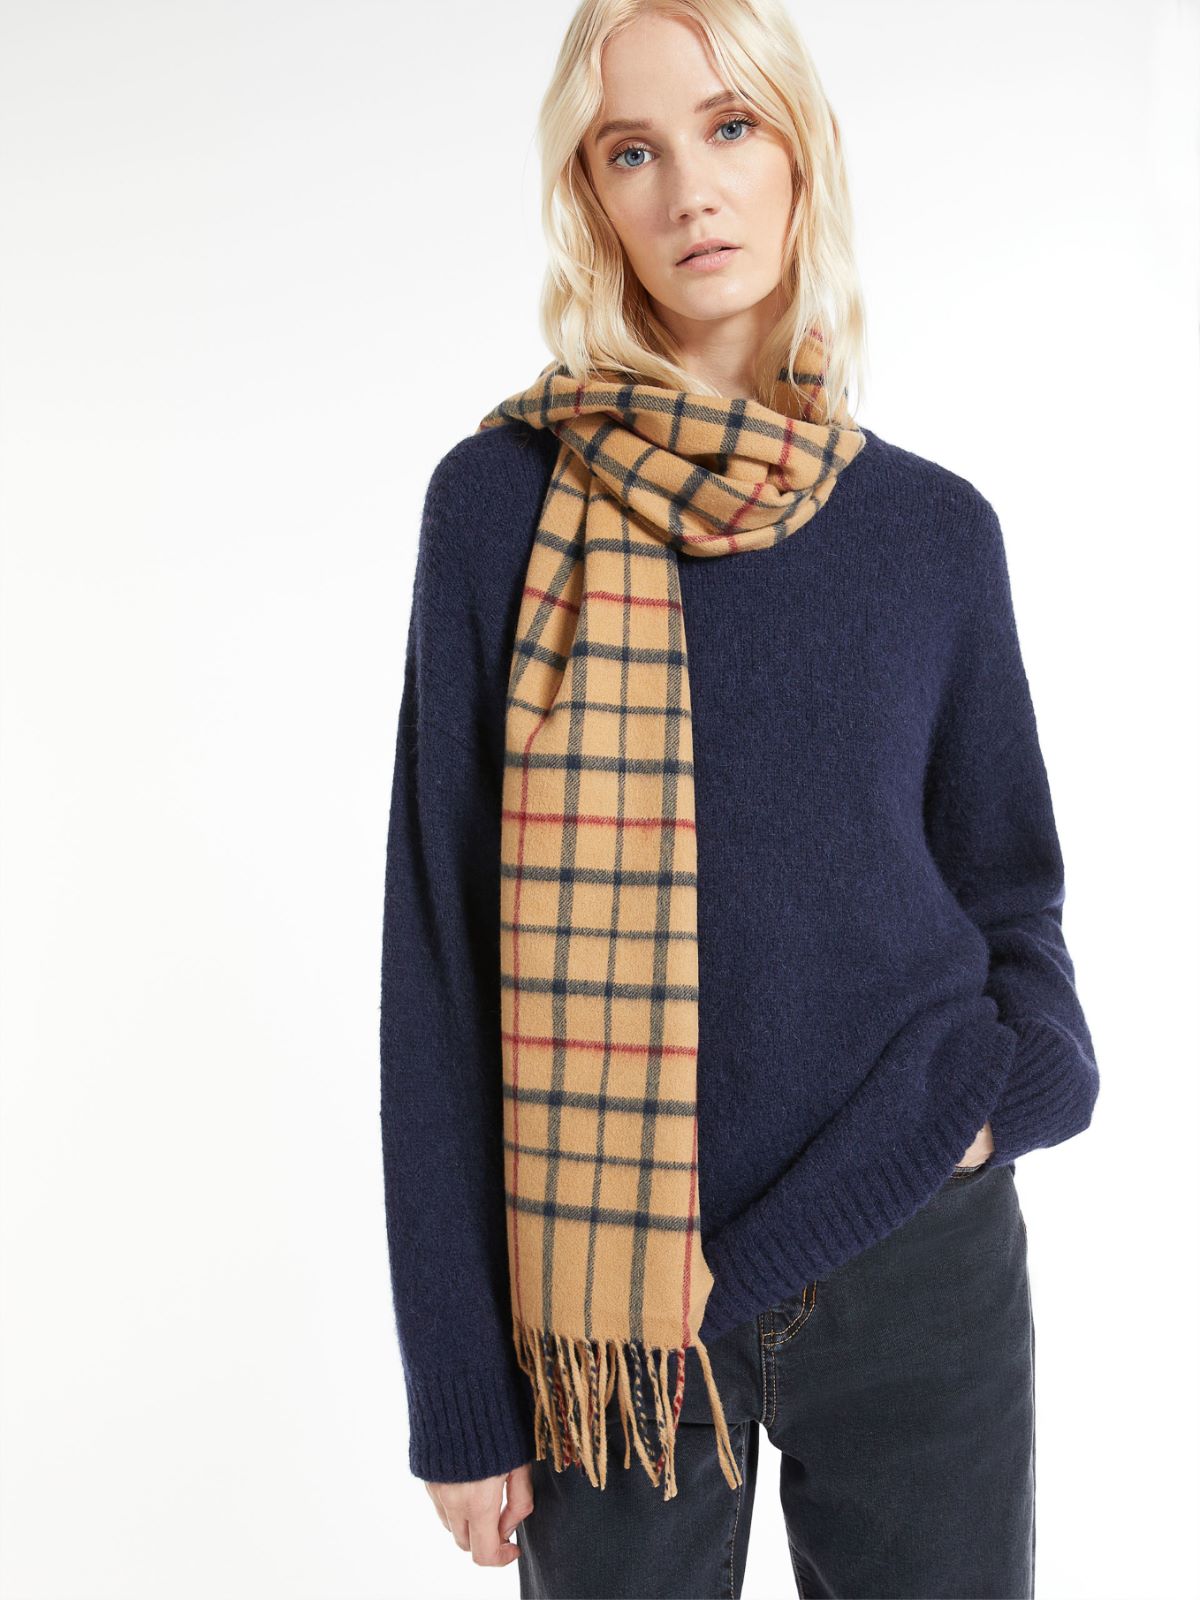 Cashmere stole - CAMEL - Weekend Max Mara - 4